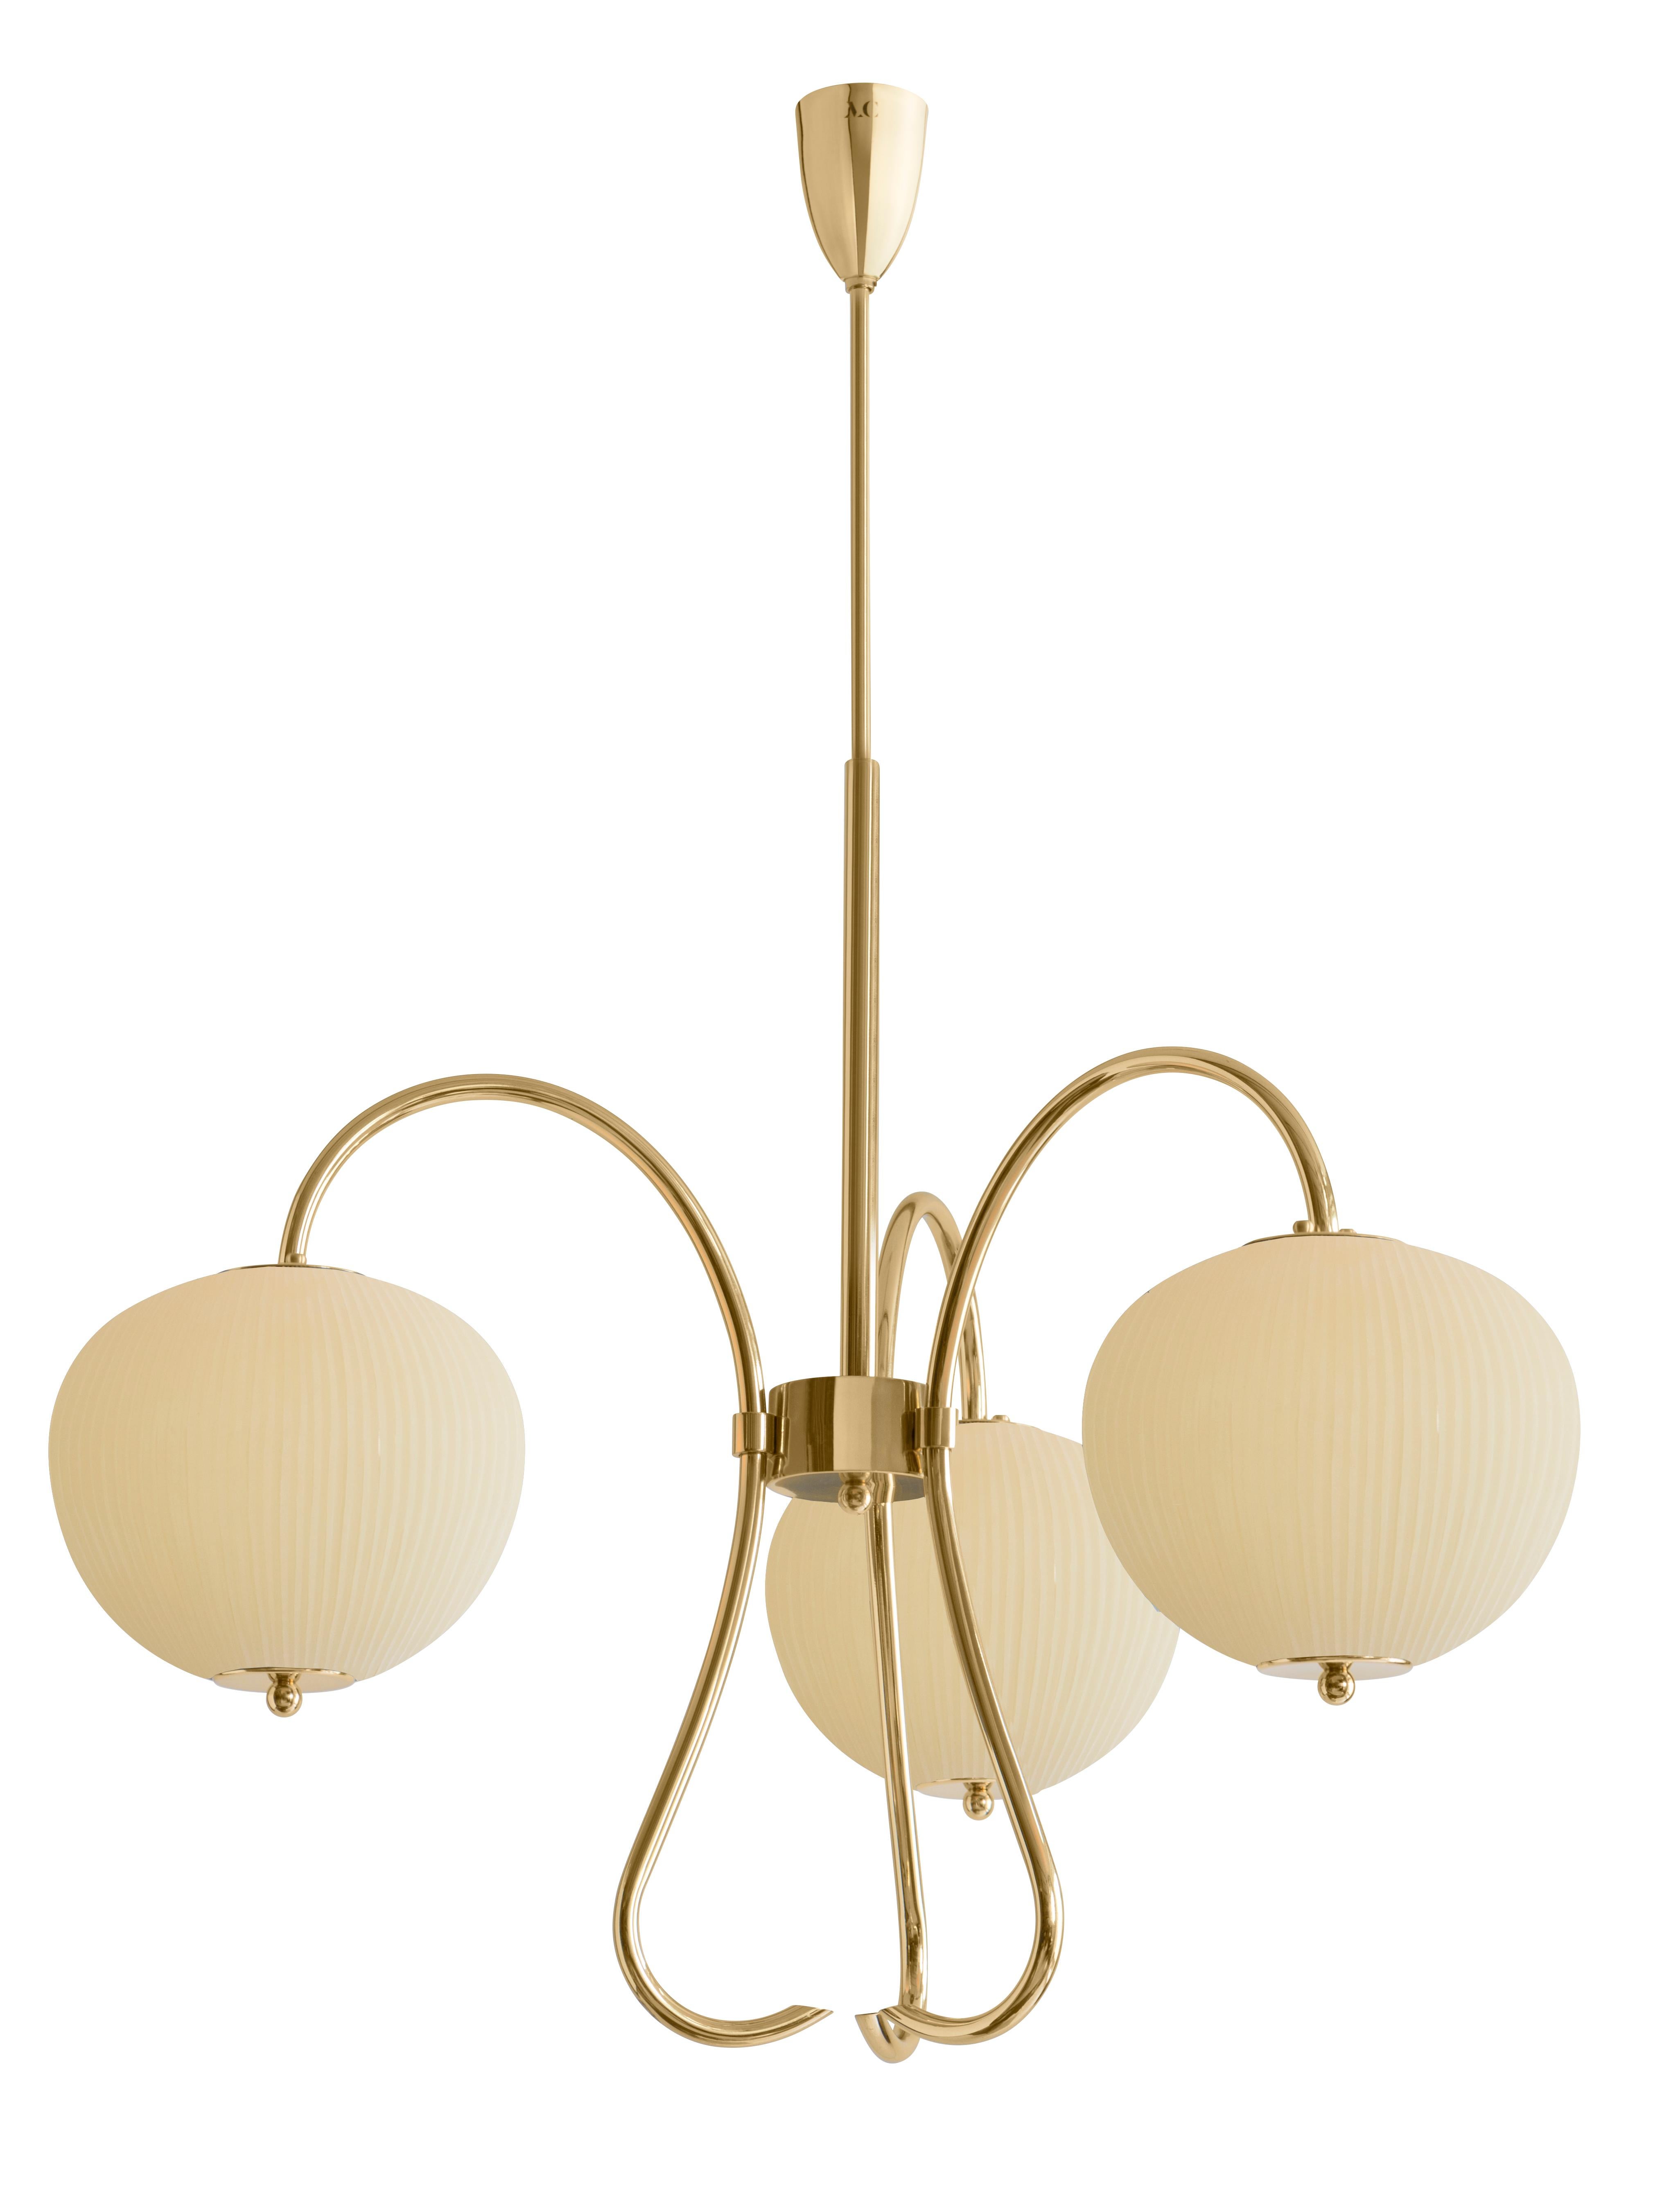 Triple chandelier China 03 by Magic Circus Editions
Dimensions: H 120 x W 81.5 x D 26.2 cm
Materials: Brass, mouth blown glass sculpted with a diamond saw
Colour: mustard

Available finishes: Brass, nickel
Available colours: enamel soft white,